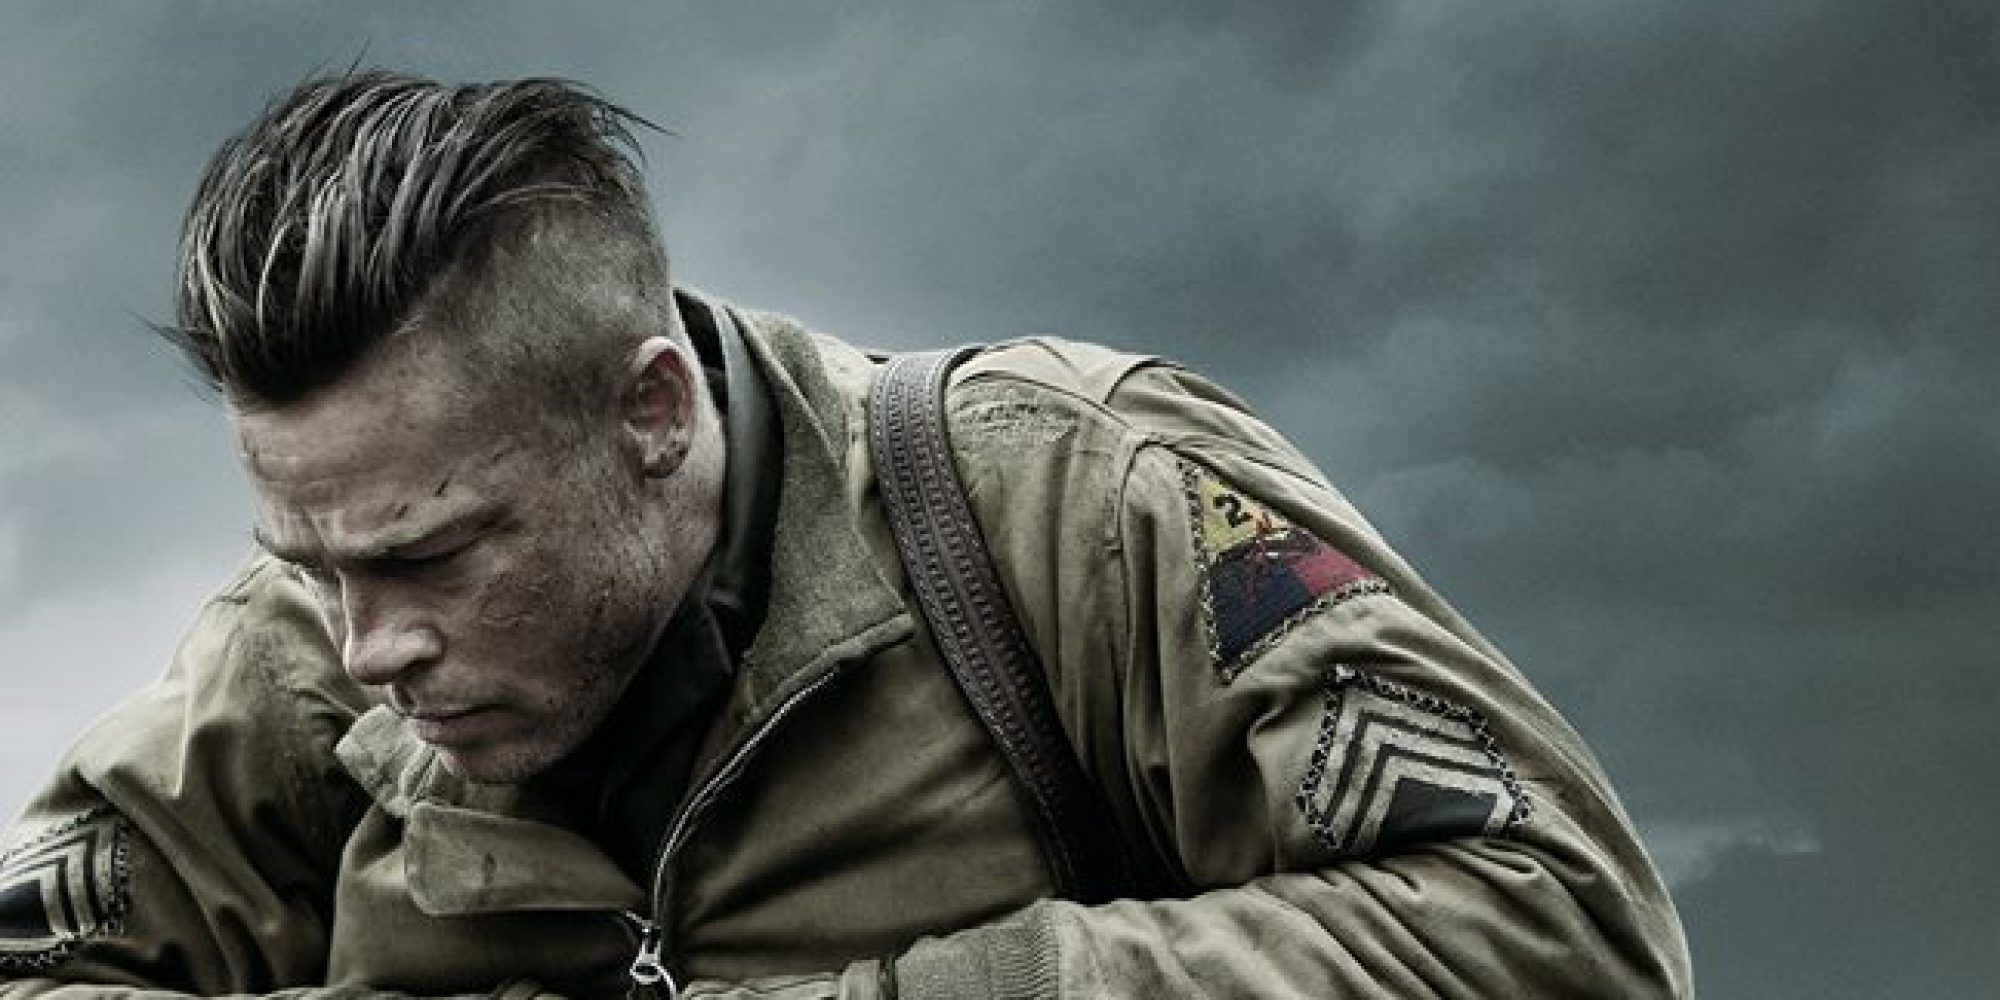 Fury wallpapers, Movie, HQ Fury pictures